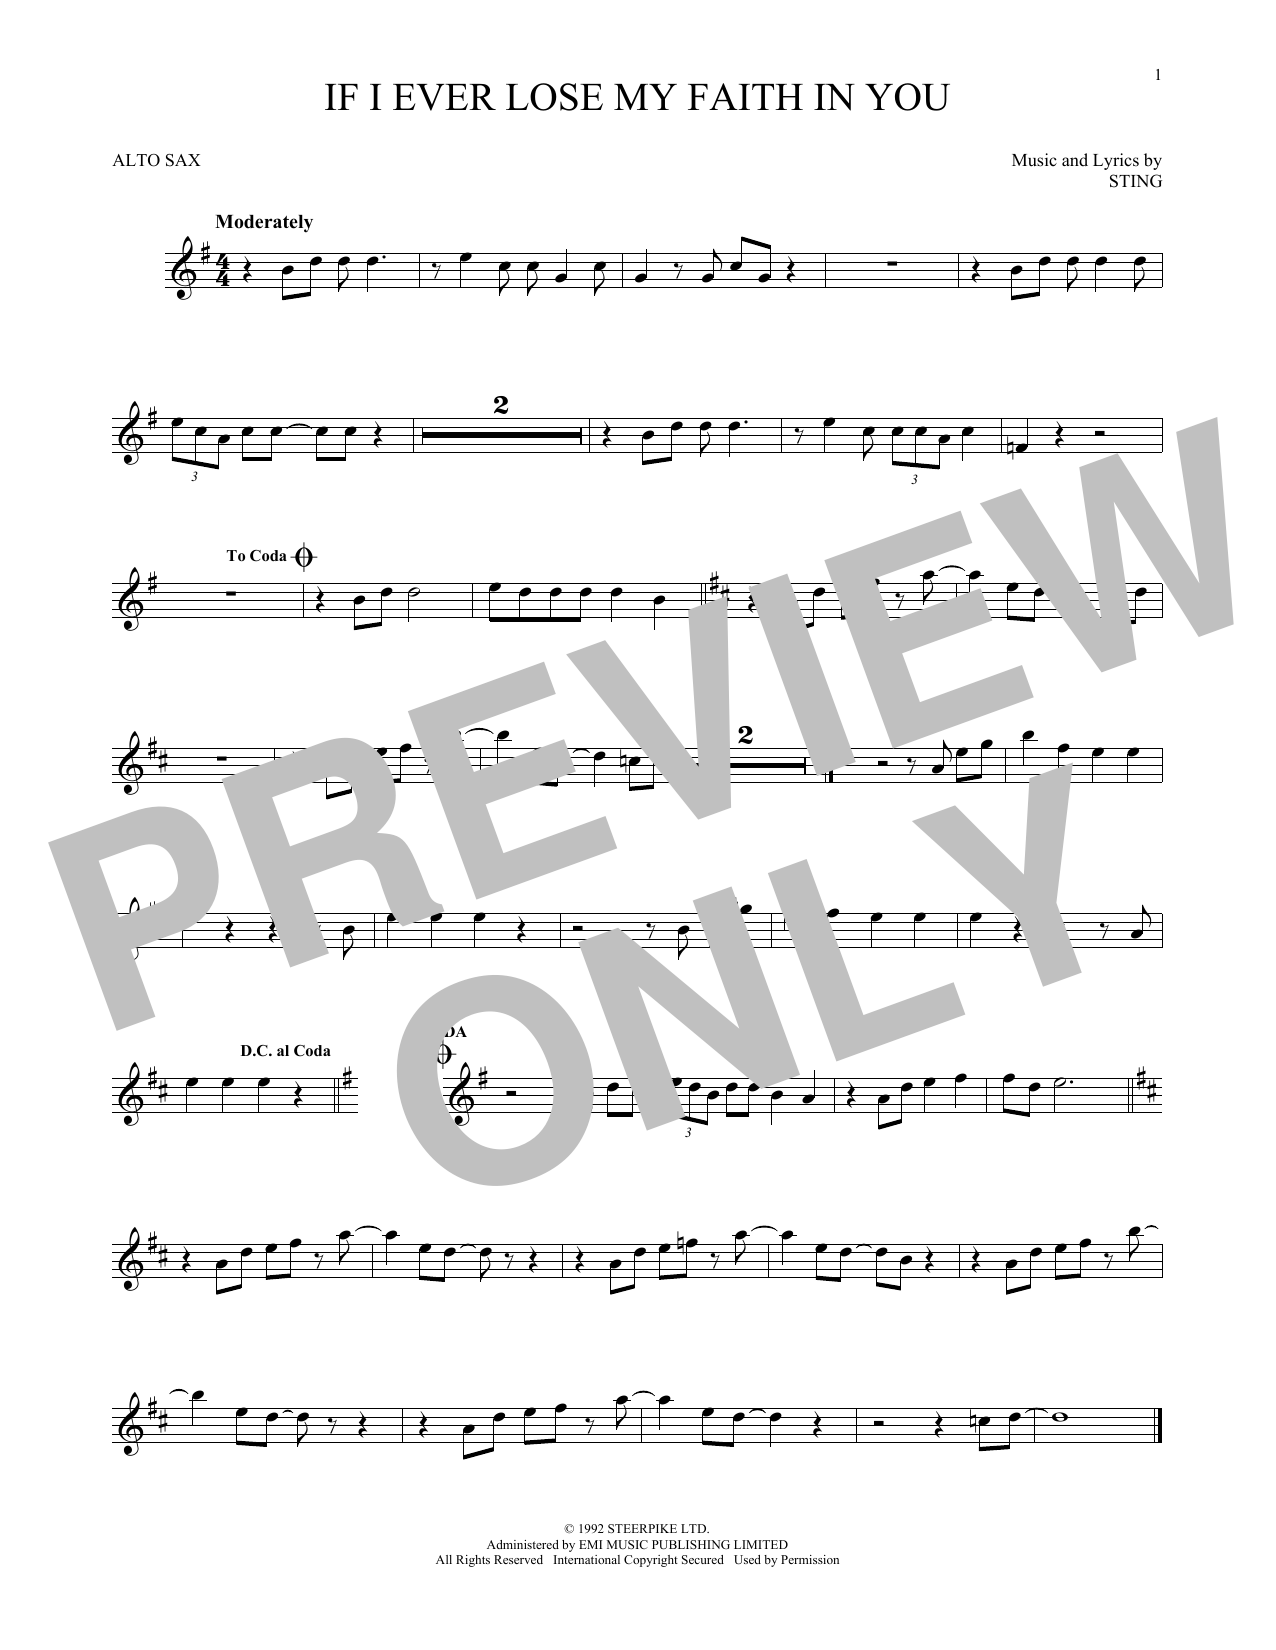 Download Sting If I Ever Lose My Faith In You Sheet Music